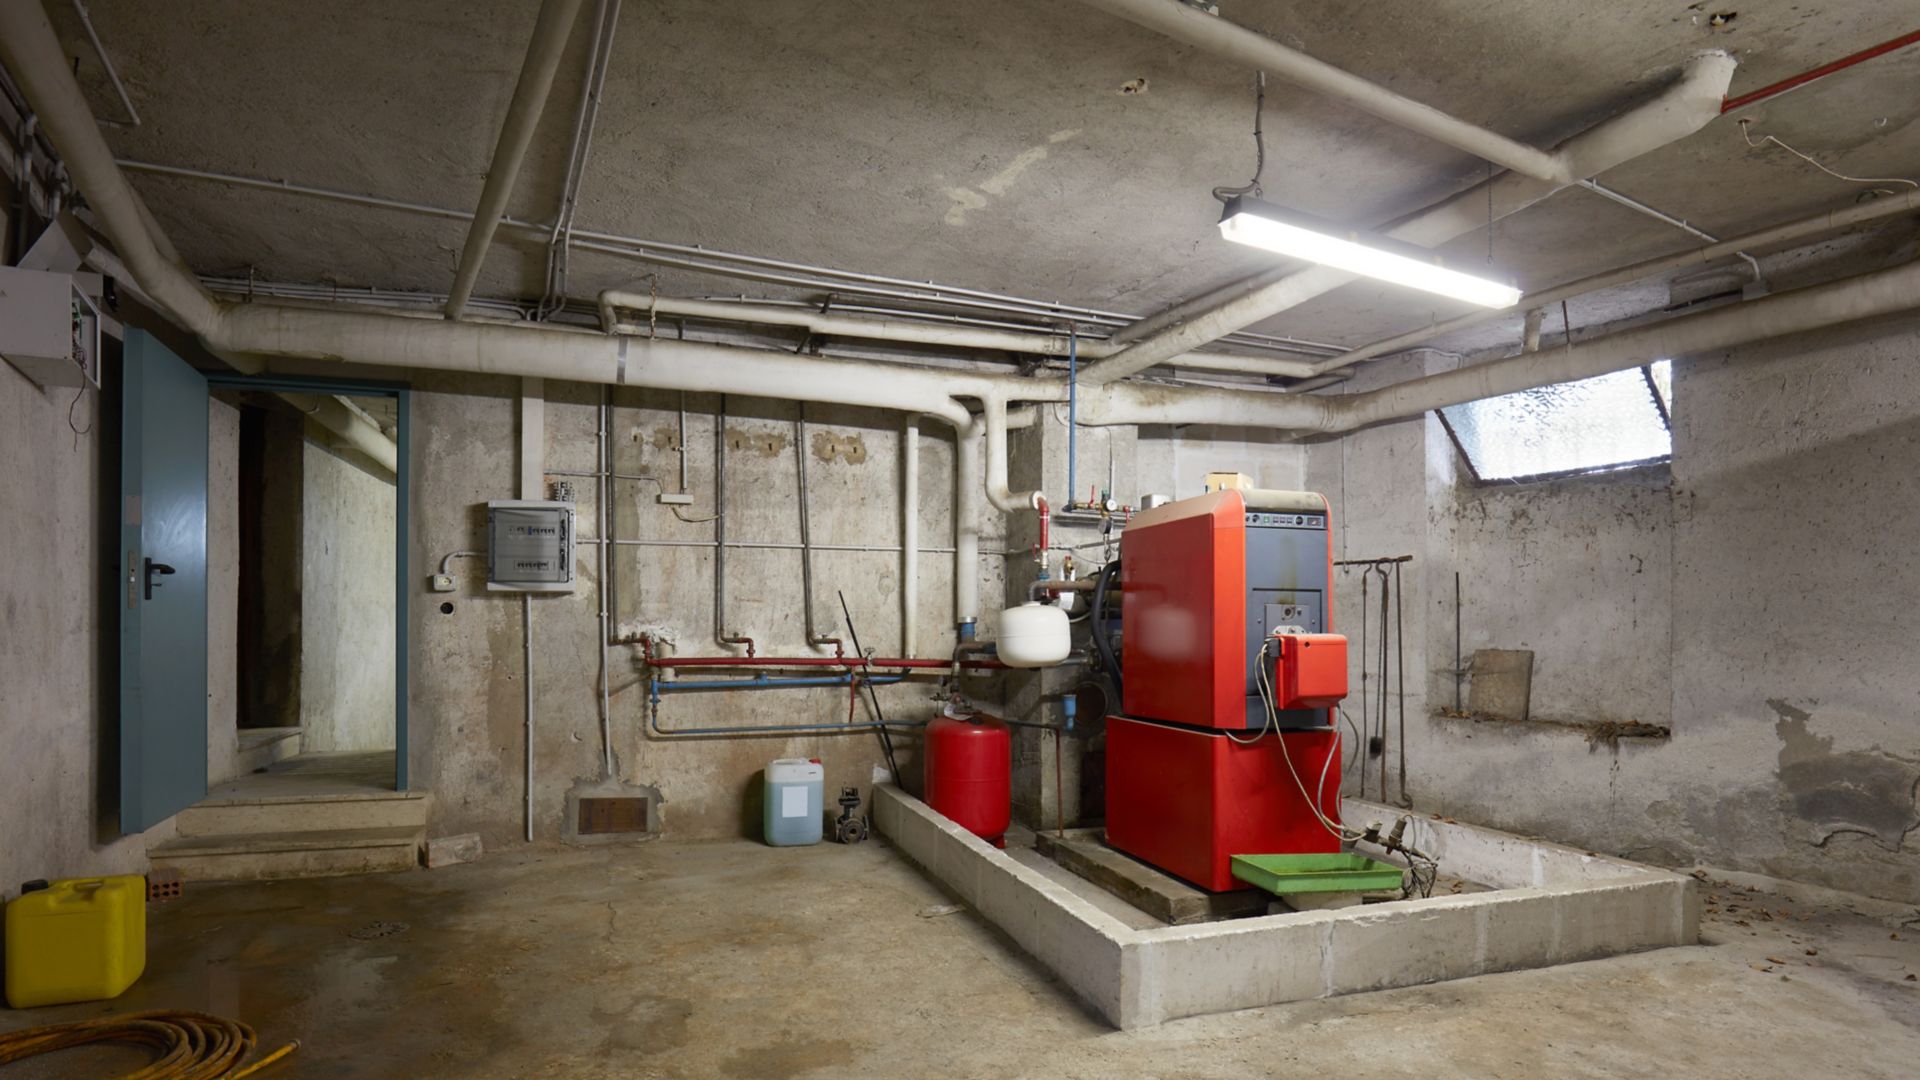 Basement with red heating boiler in old house interior, cement floor